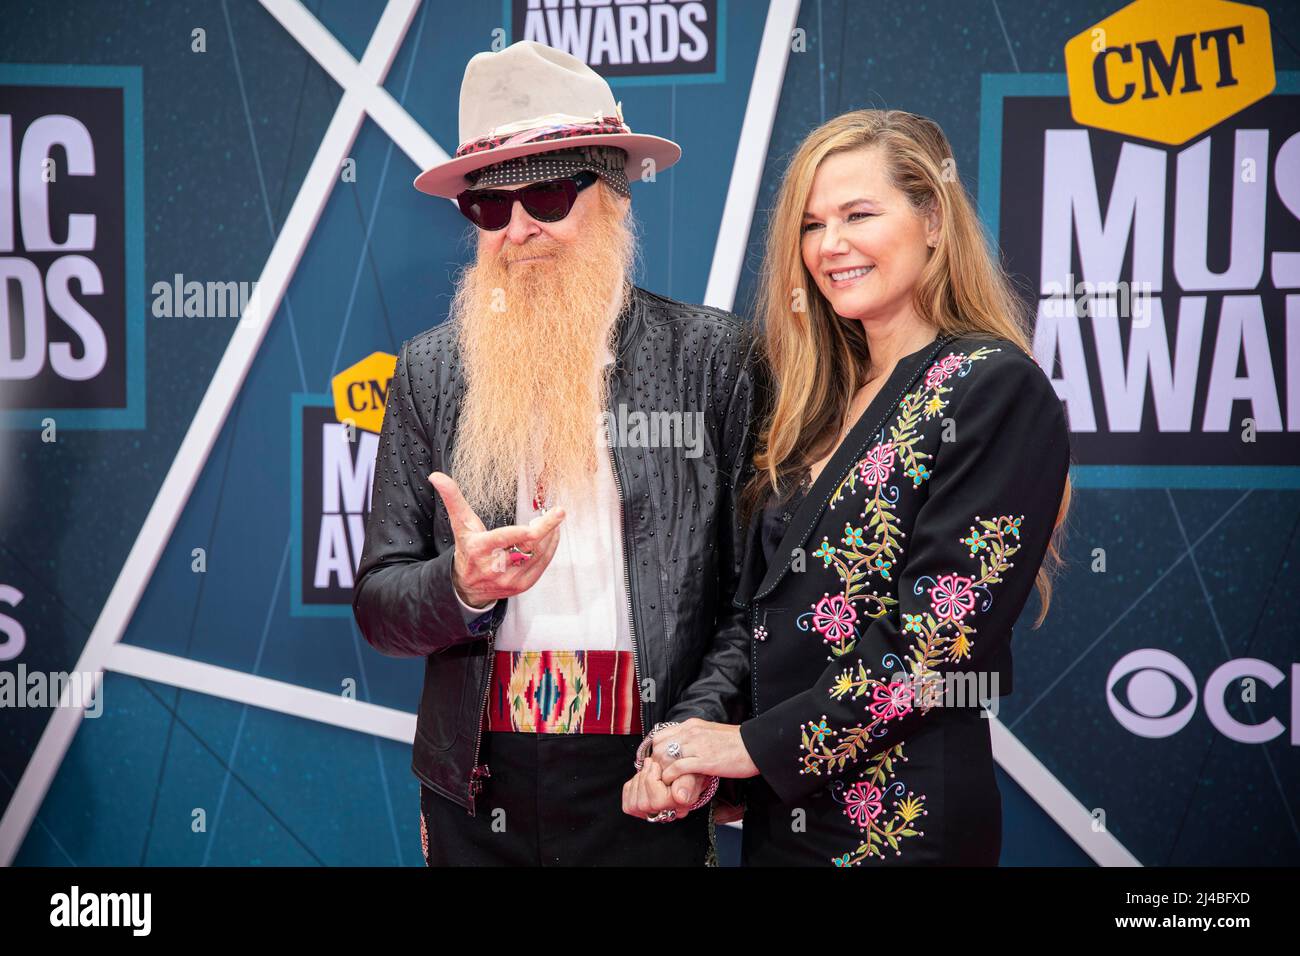 Nashville, Tenn. - April 11, 2022 Billy Gibbons of ZZ Top and wife Gilligan Stillwater arrives at the red carpet for the 2022 CMT Awards on April 11, 2022 at Municipal Auditorium in Nashville, Tenn. Credit: Jamie Gilliam/The Photo Access Stock Photo